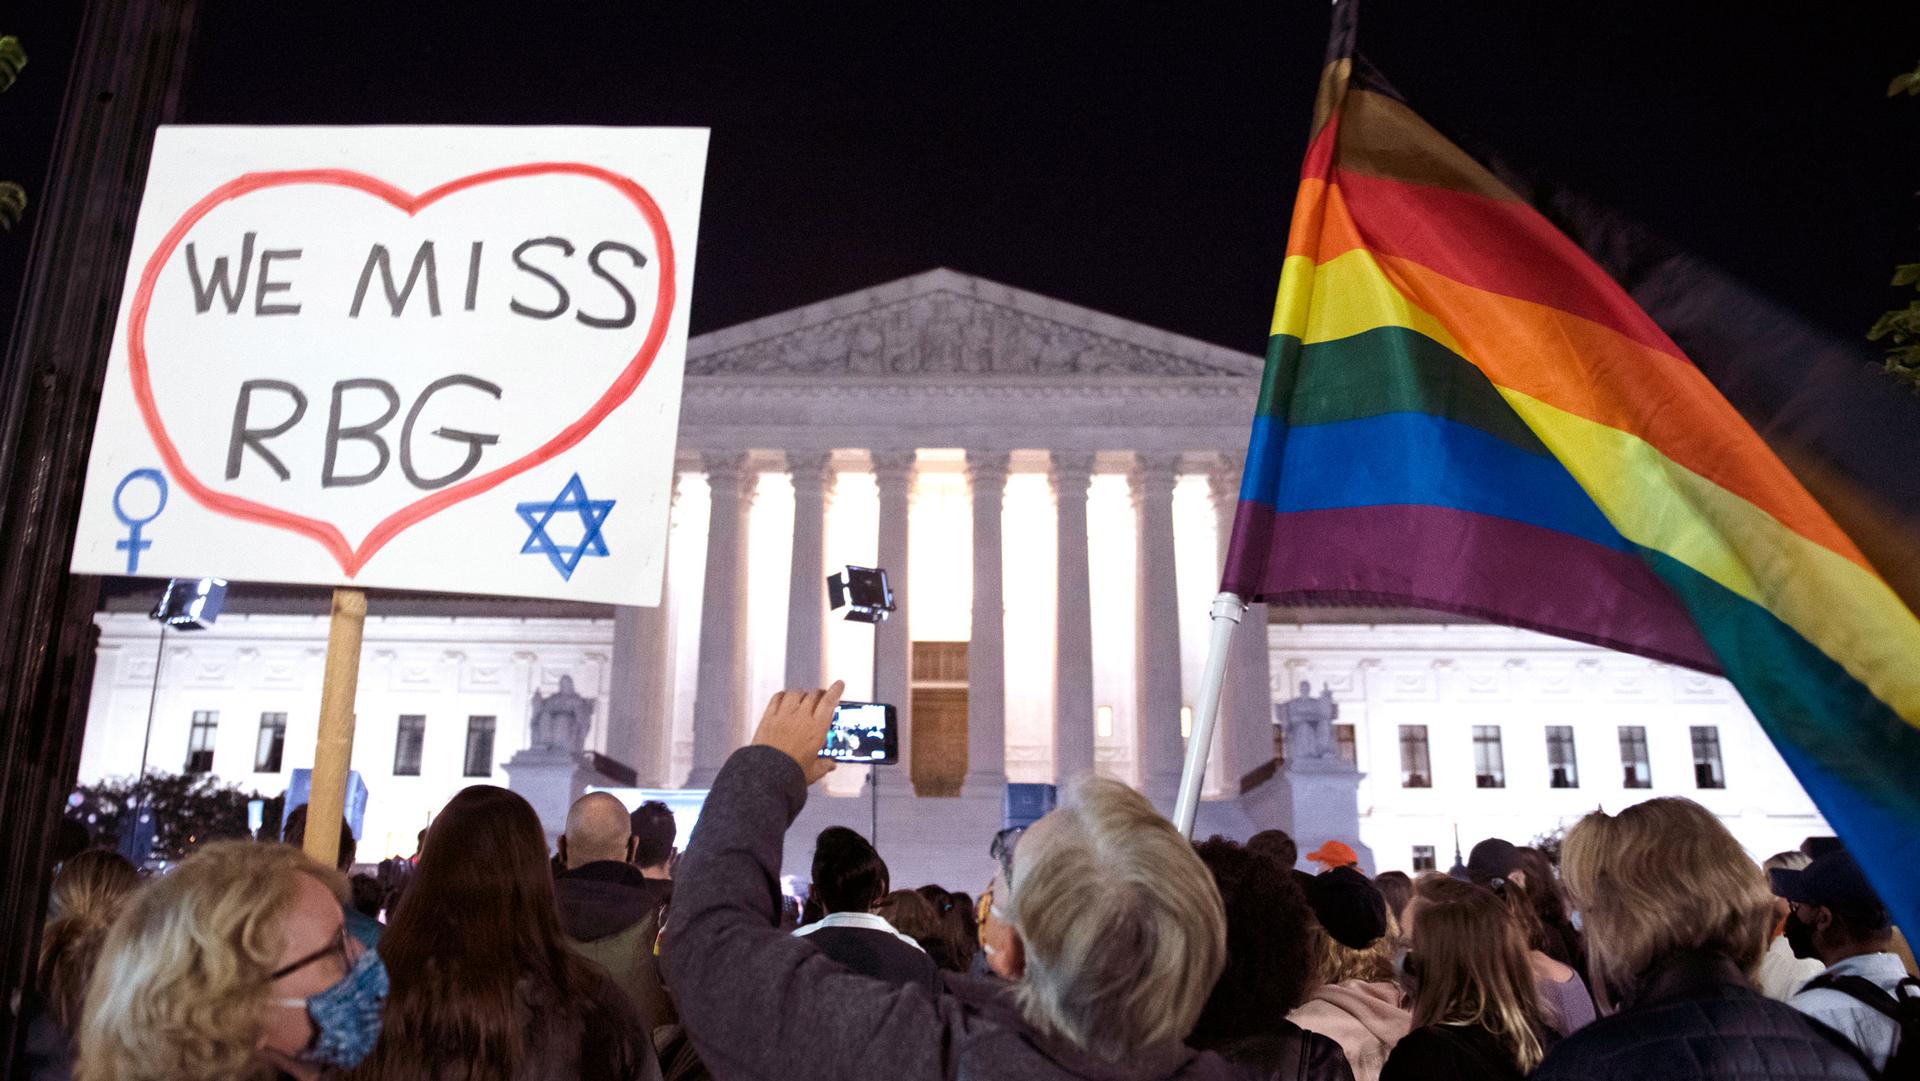 A crowd of people are shown in the dark of night outside of the brightly lit facade of the US Supreme Court and holding signs and flags.